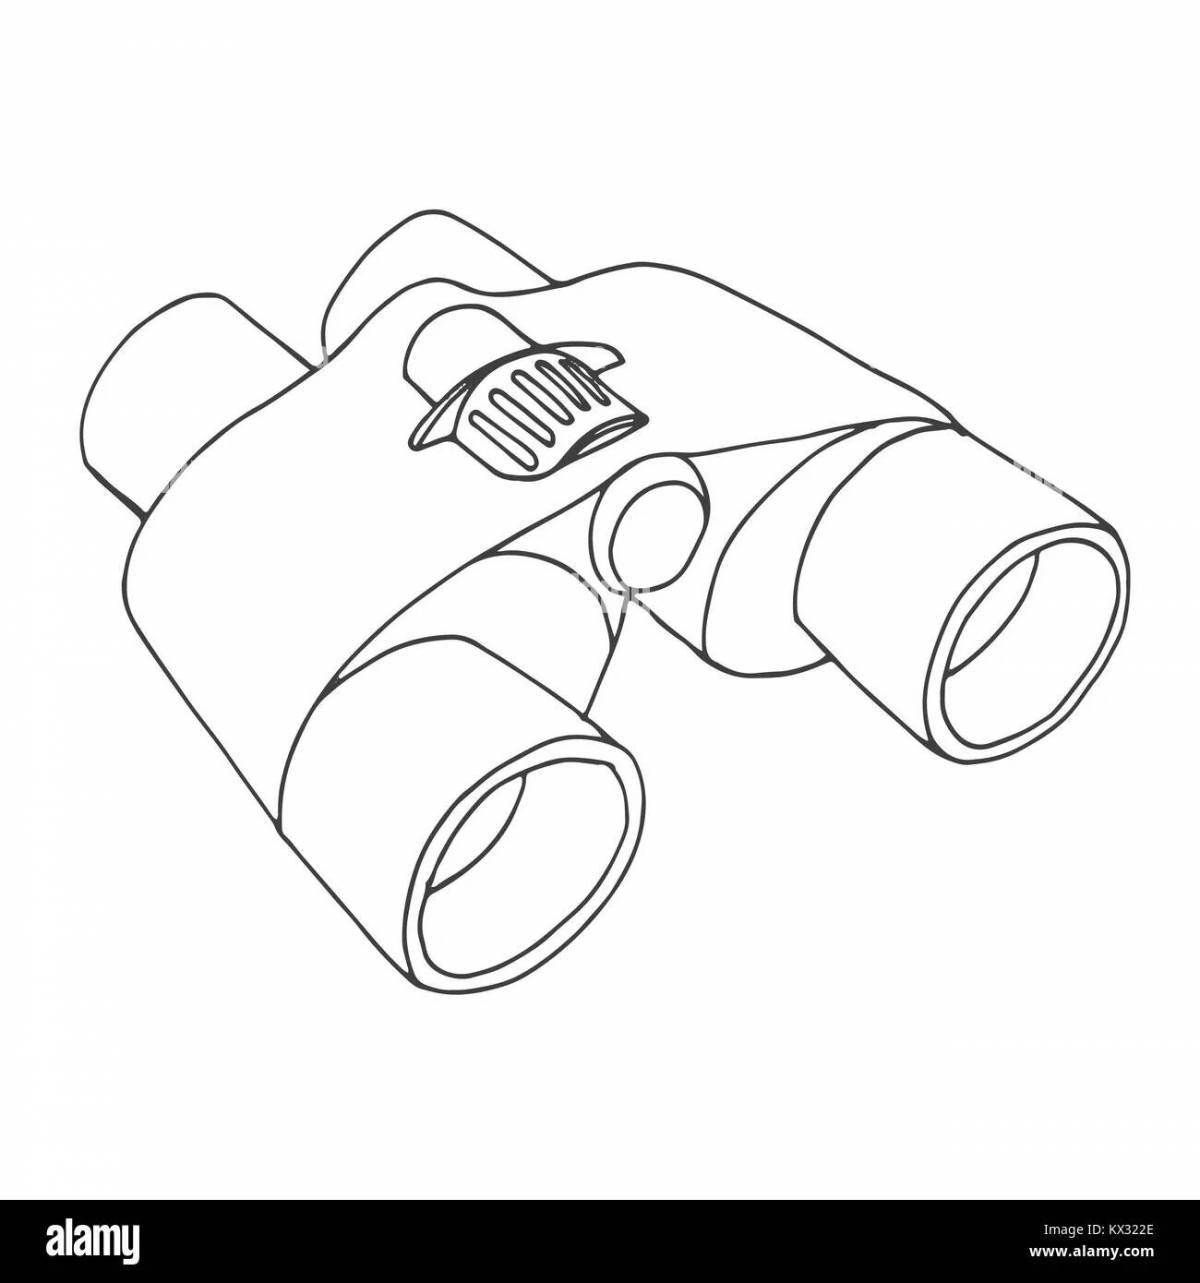 Playful binoculars coloring page for little ones